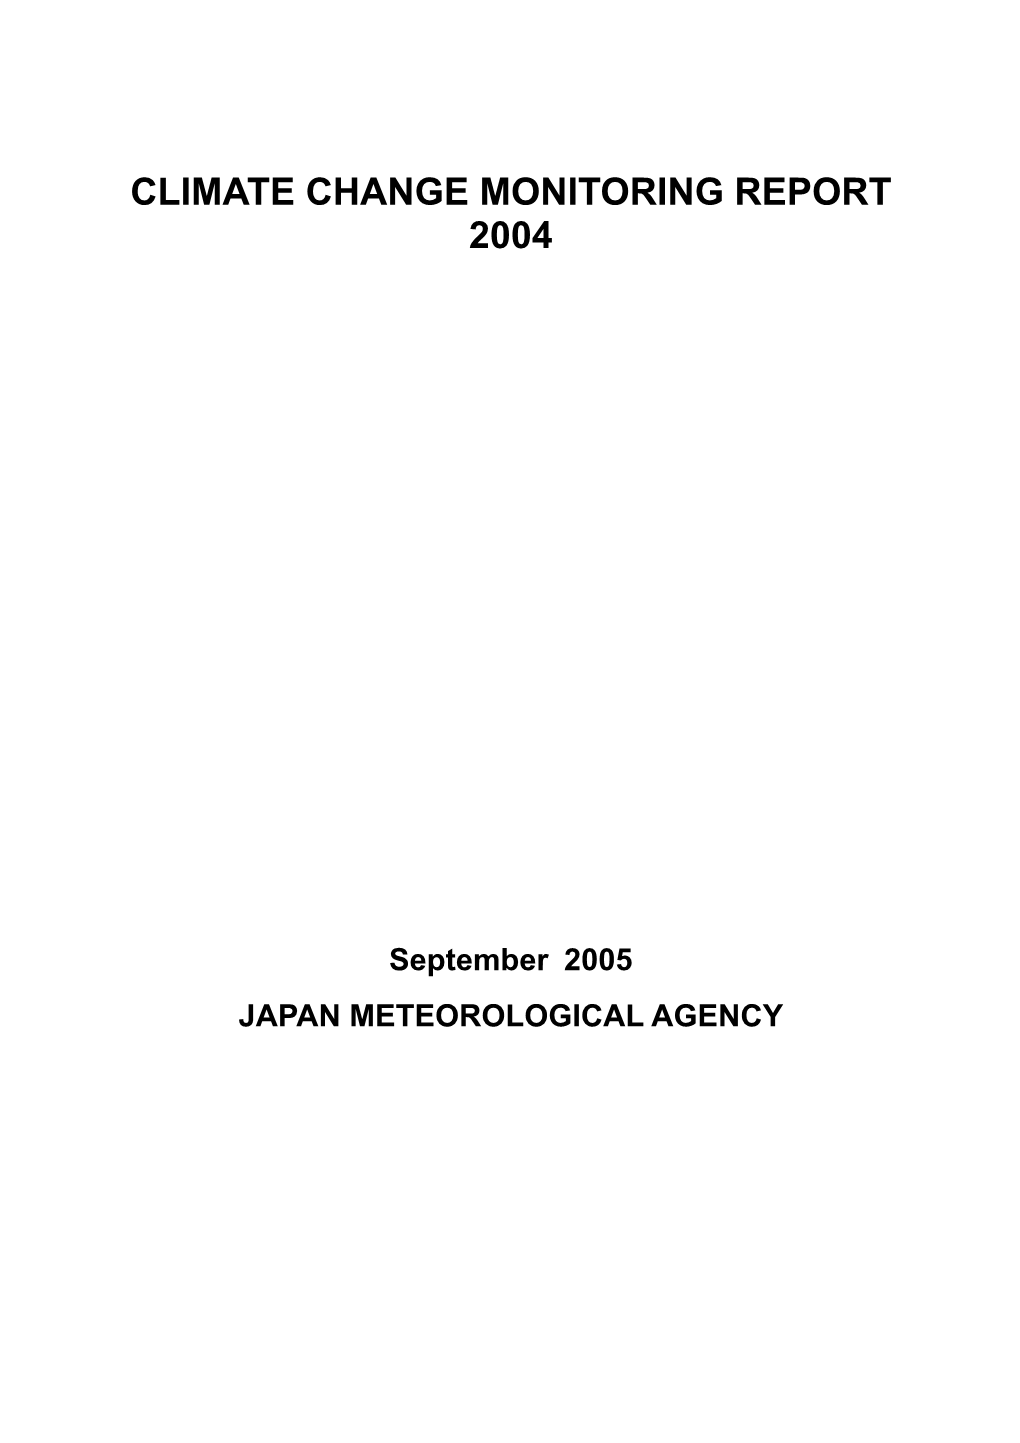 Climate Change Monitoring Report 2004